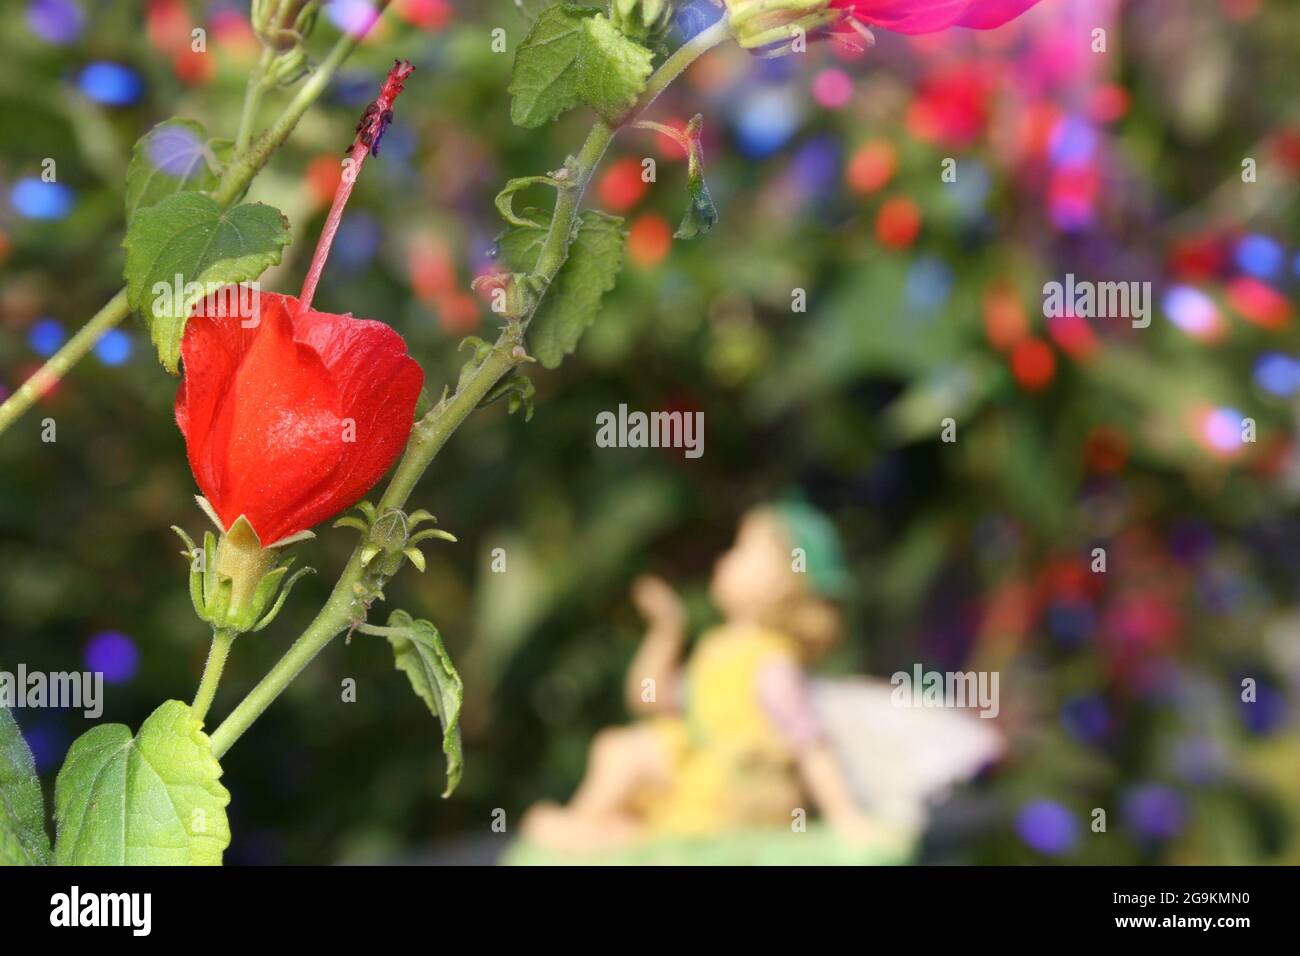 Turk's Cap Flower With Fairy in backgeound Shallow DOF Stock Photo